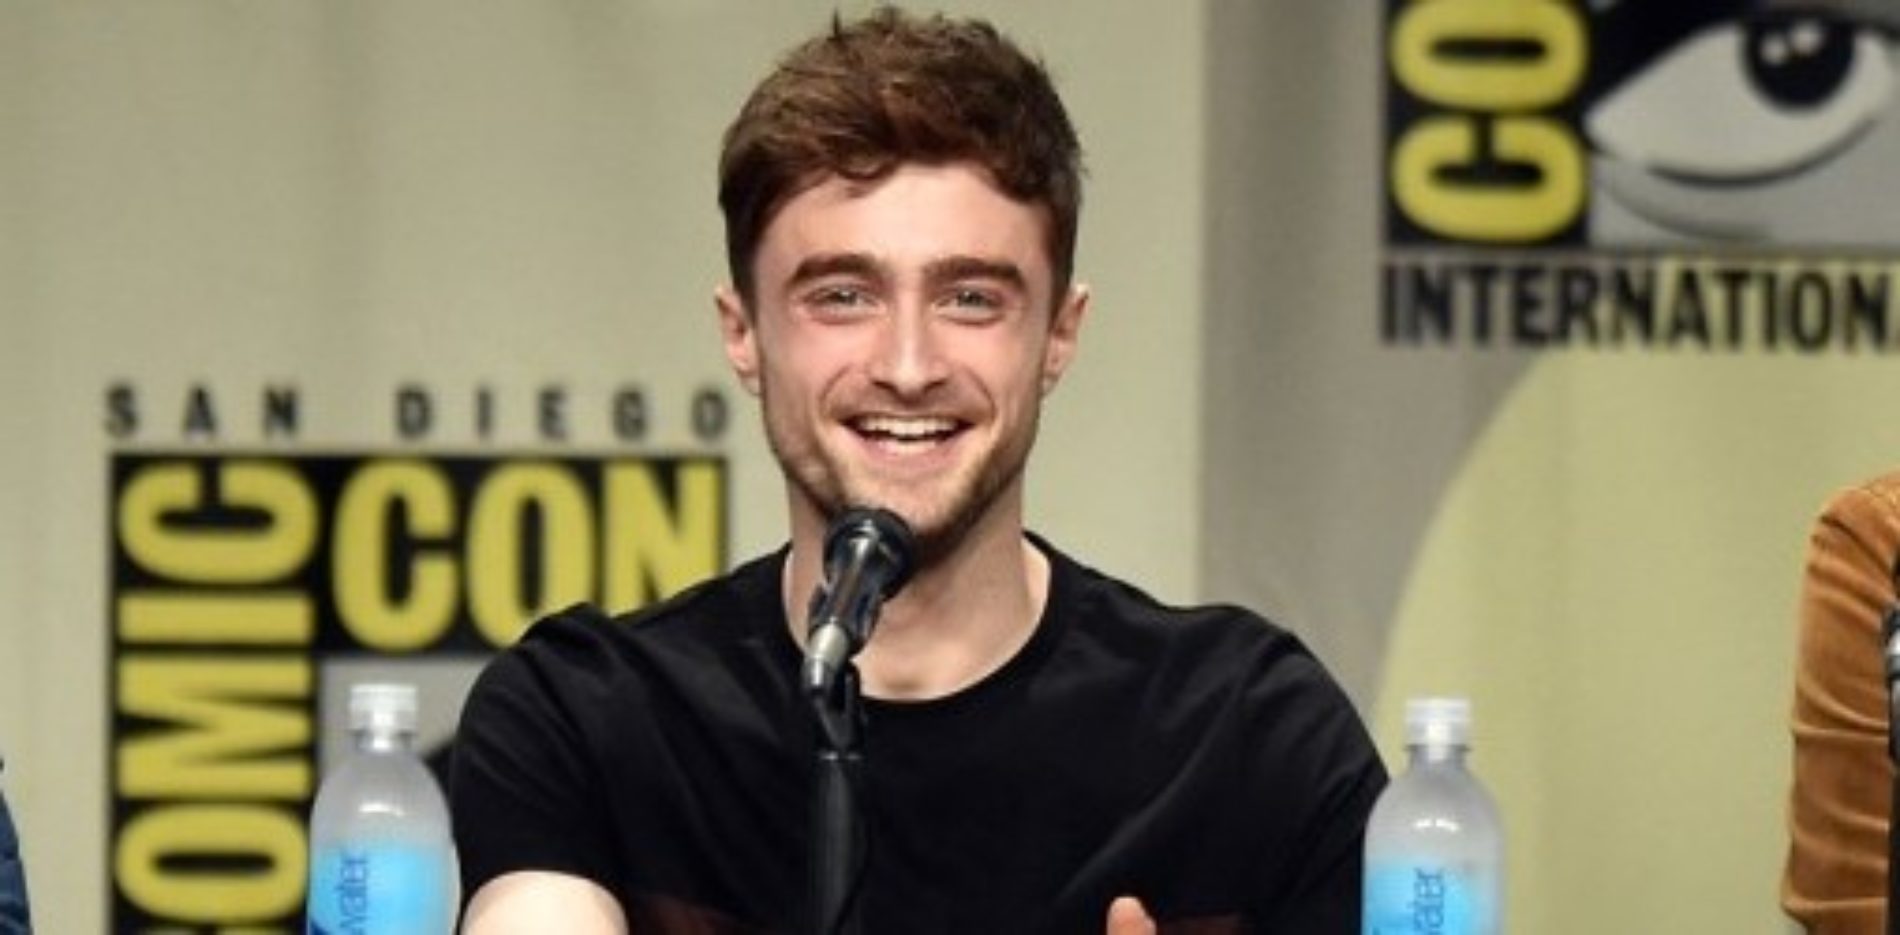 Daniel Radcliffe Is Thankful To Be ‘Rear of the Year’